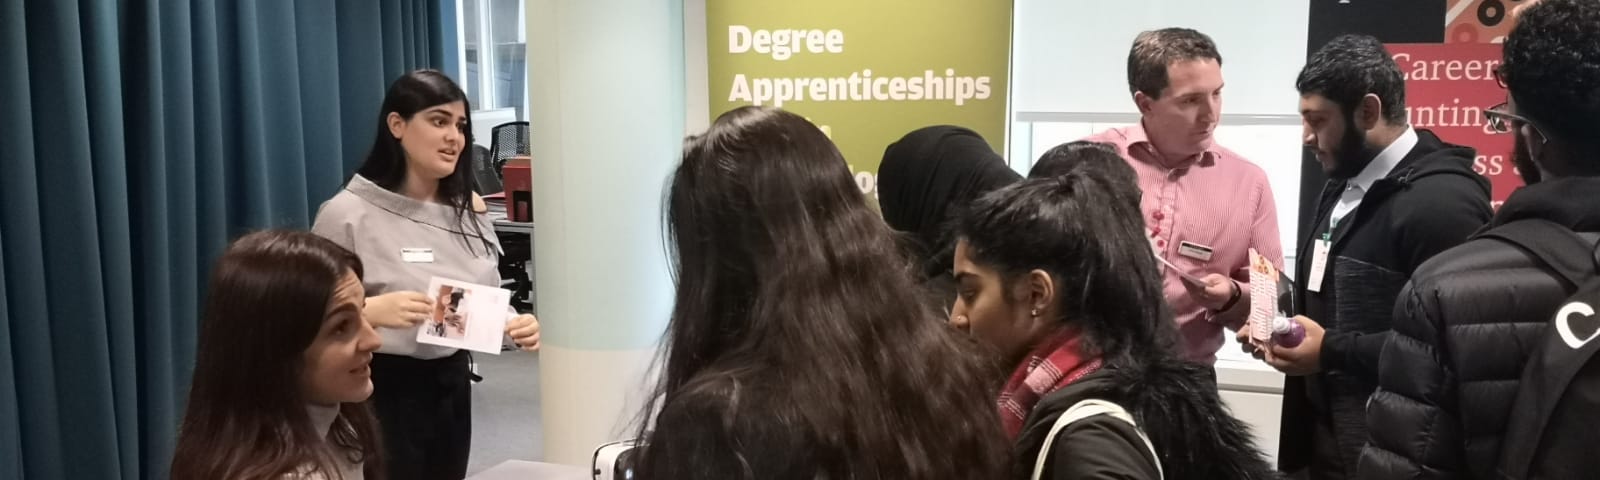 Students networking at careers stalls